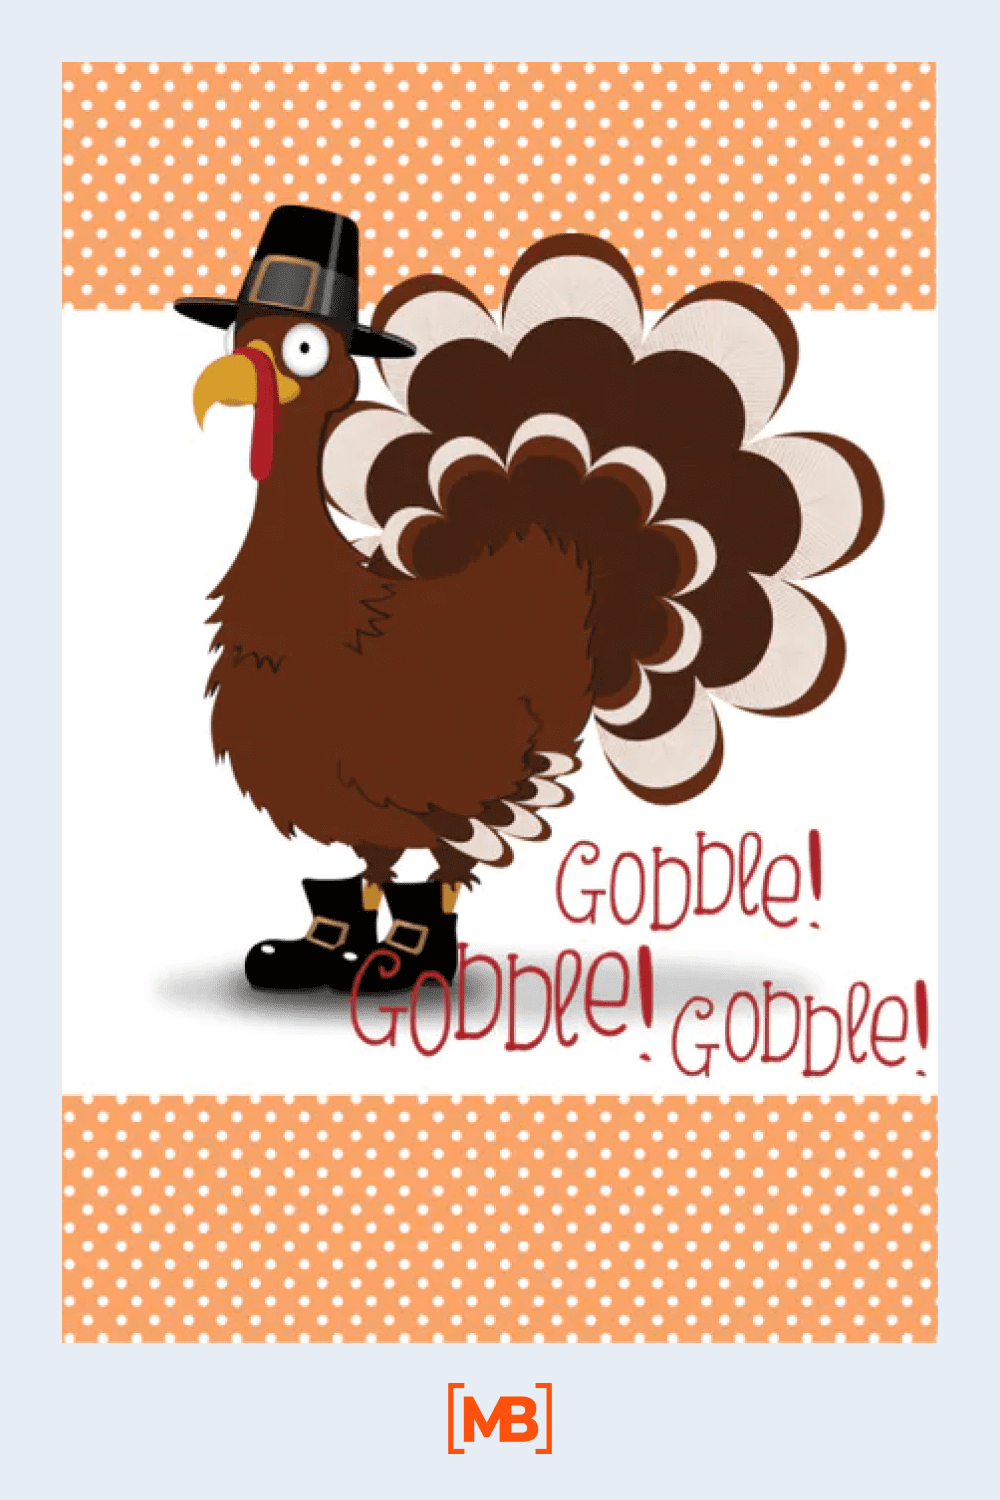 Pausefor aday - Thanksgiving card.